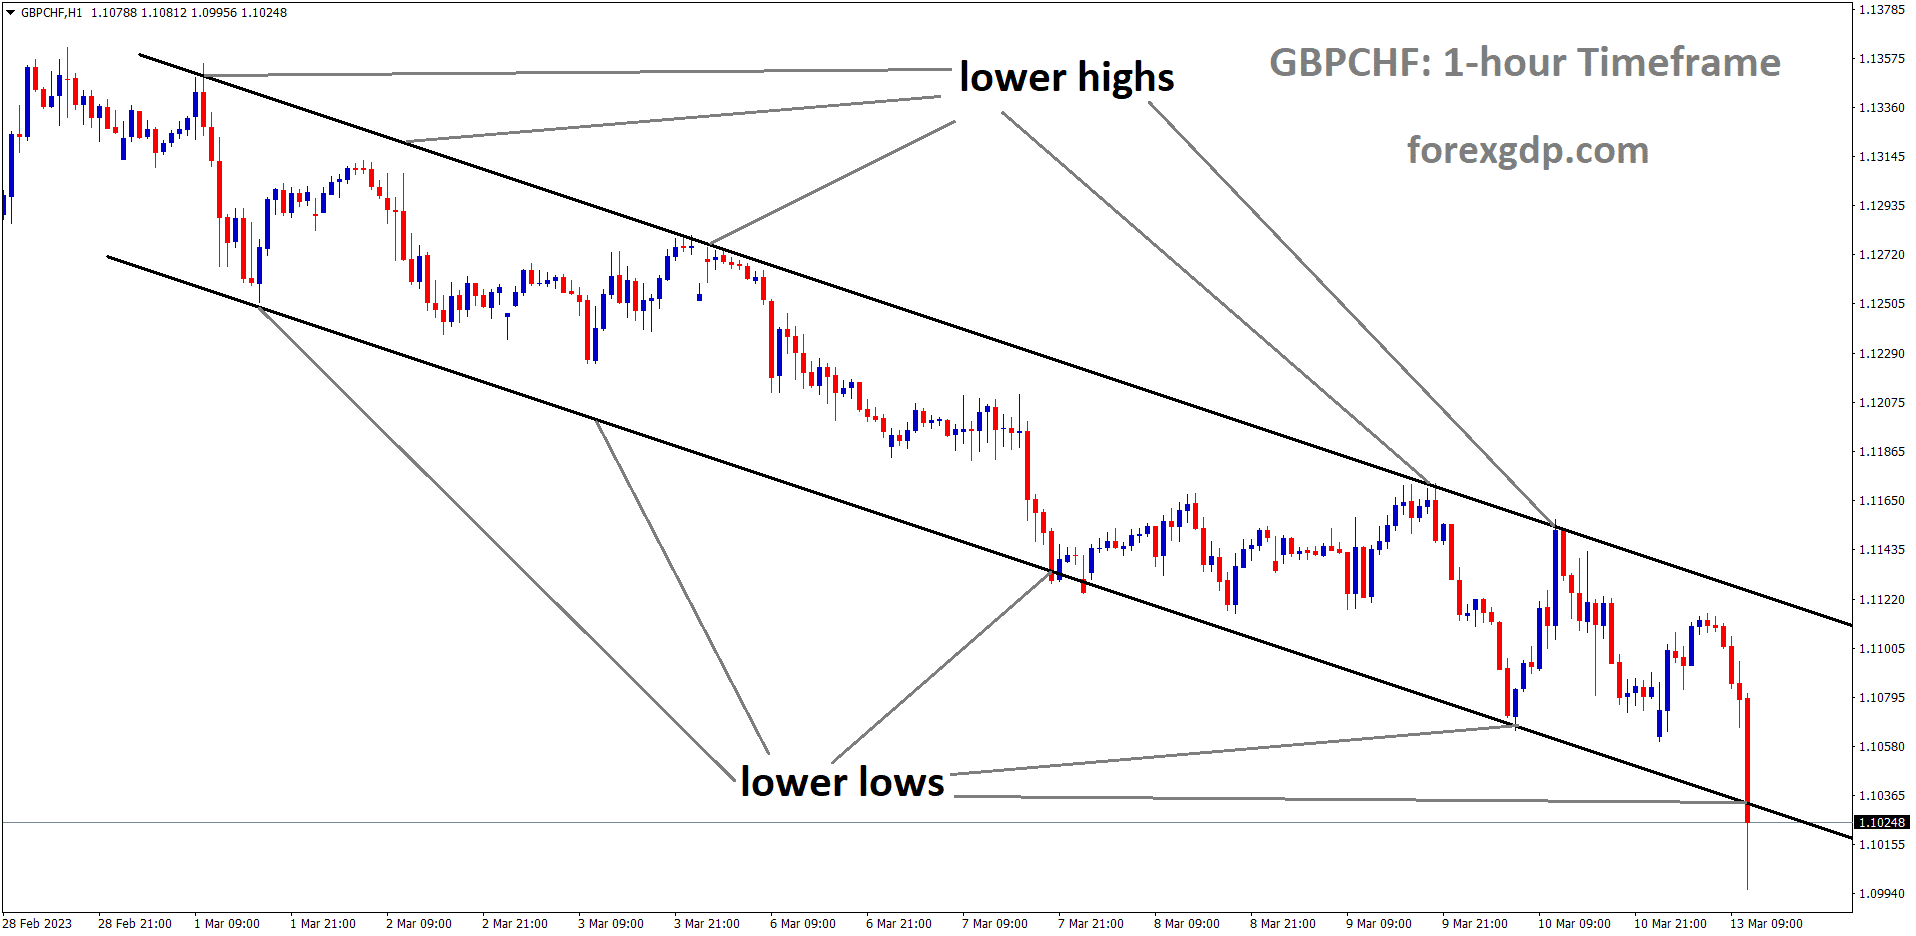 GBPCHF is moving in Descending channel and the market has reached the lower low area of the channel.